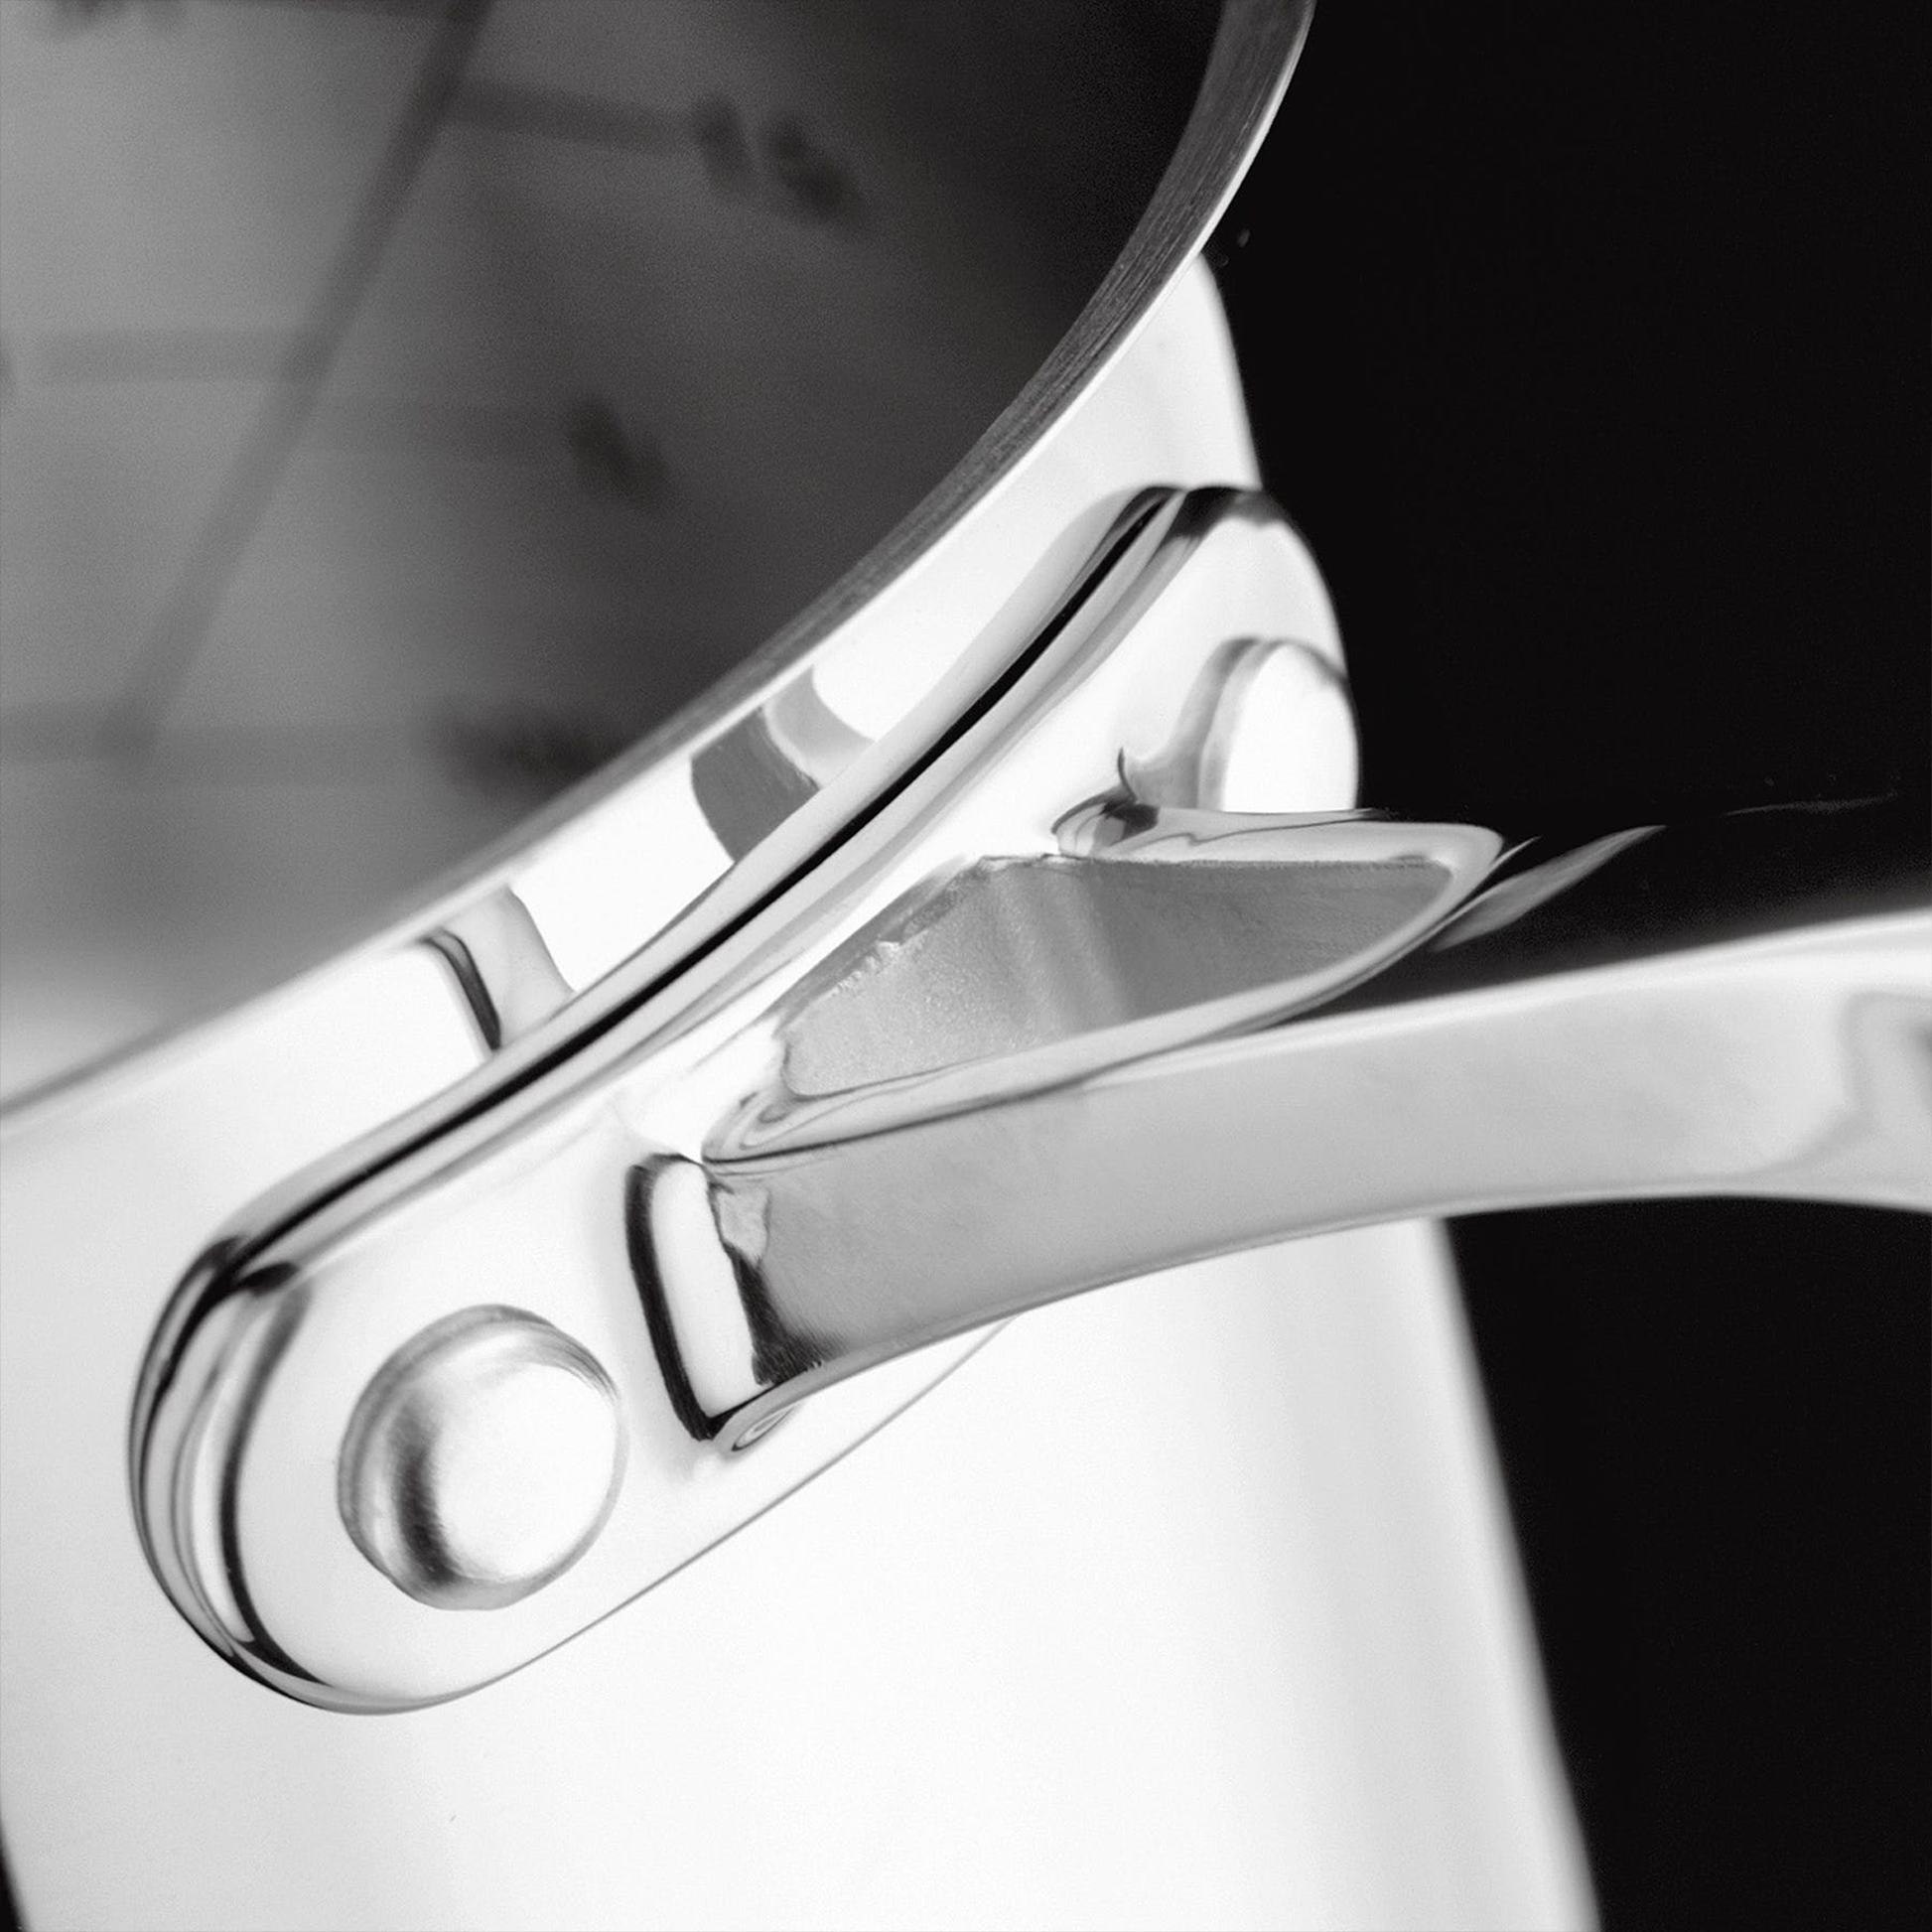 a close up of the stainless steel handle